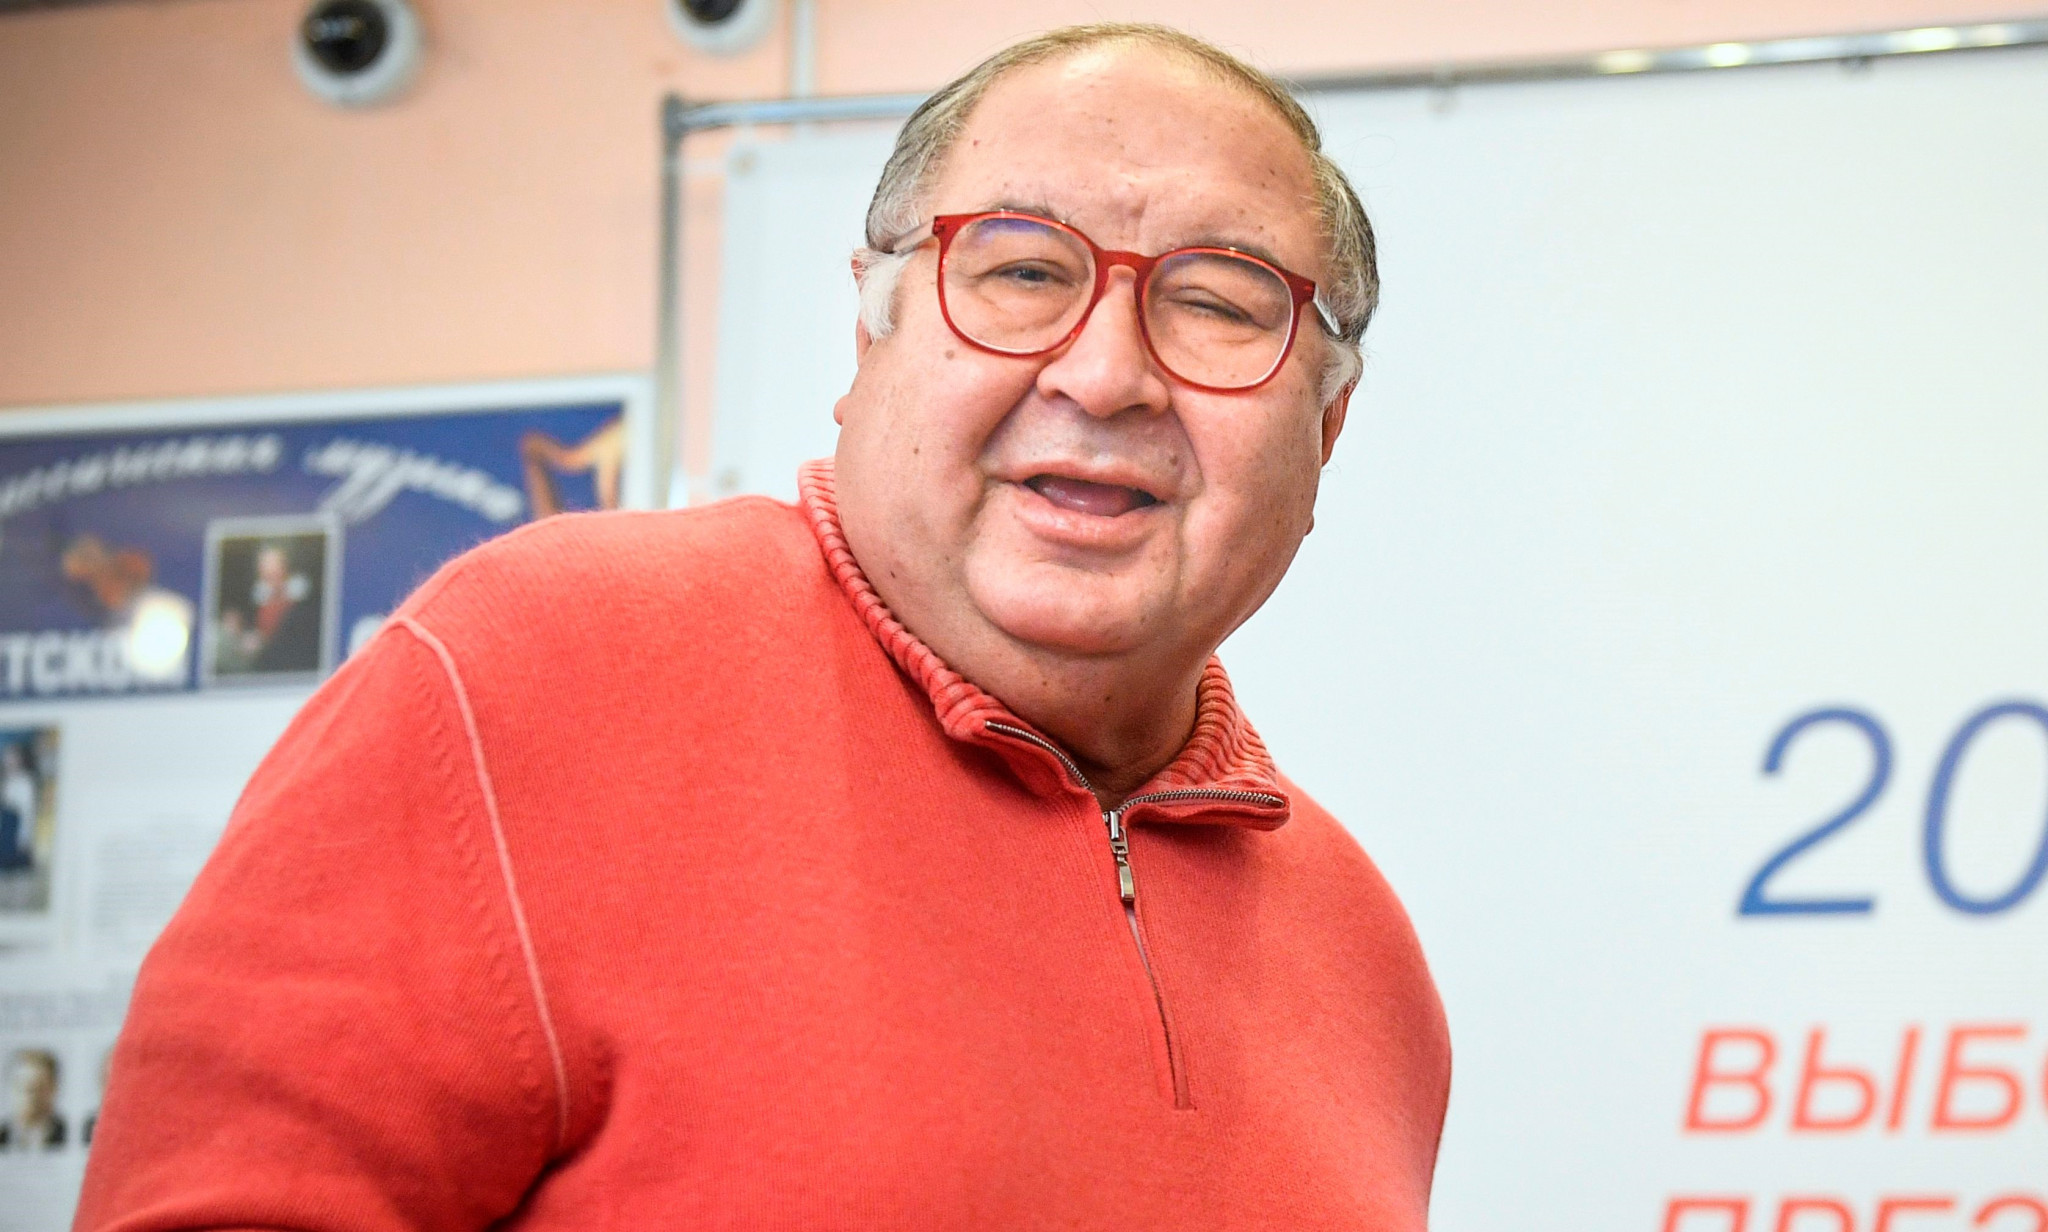 Alisher Usmanov has been President of the International Fencing Federation since 2008 ©Getty Images